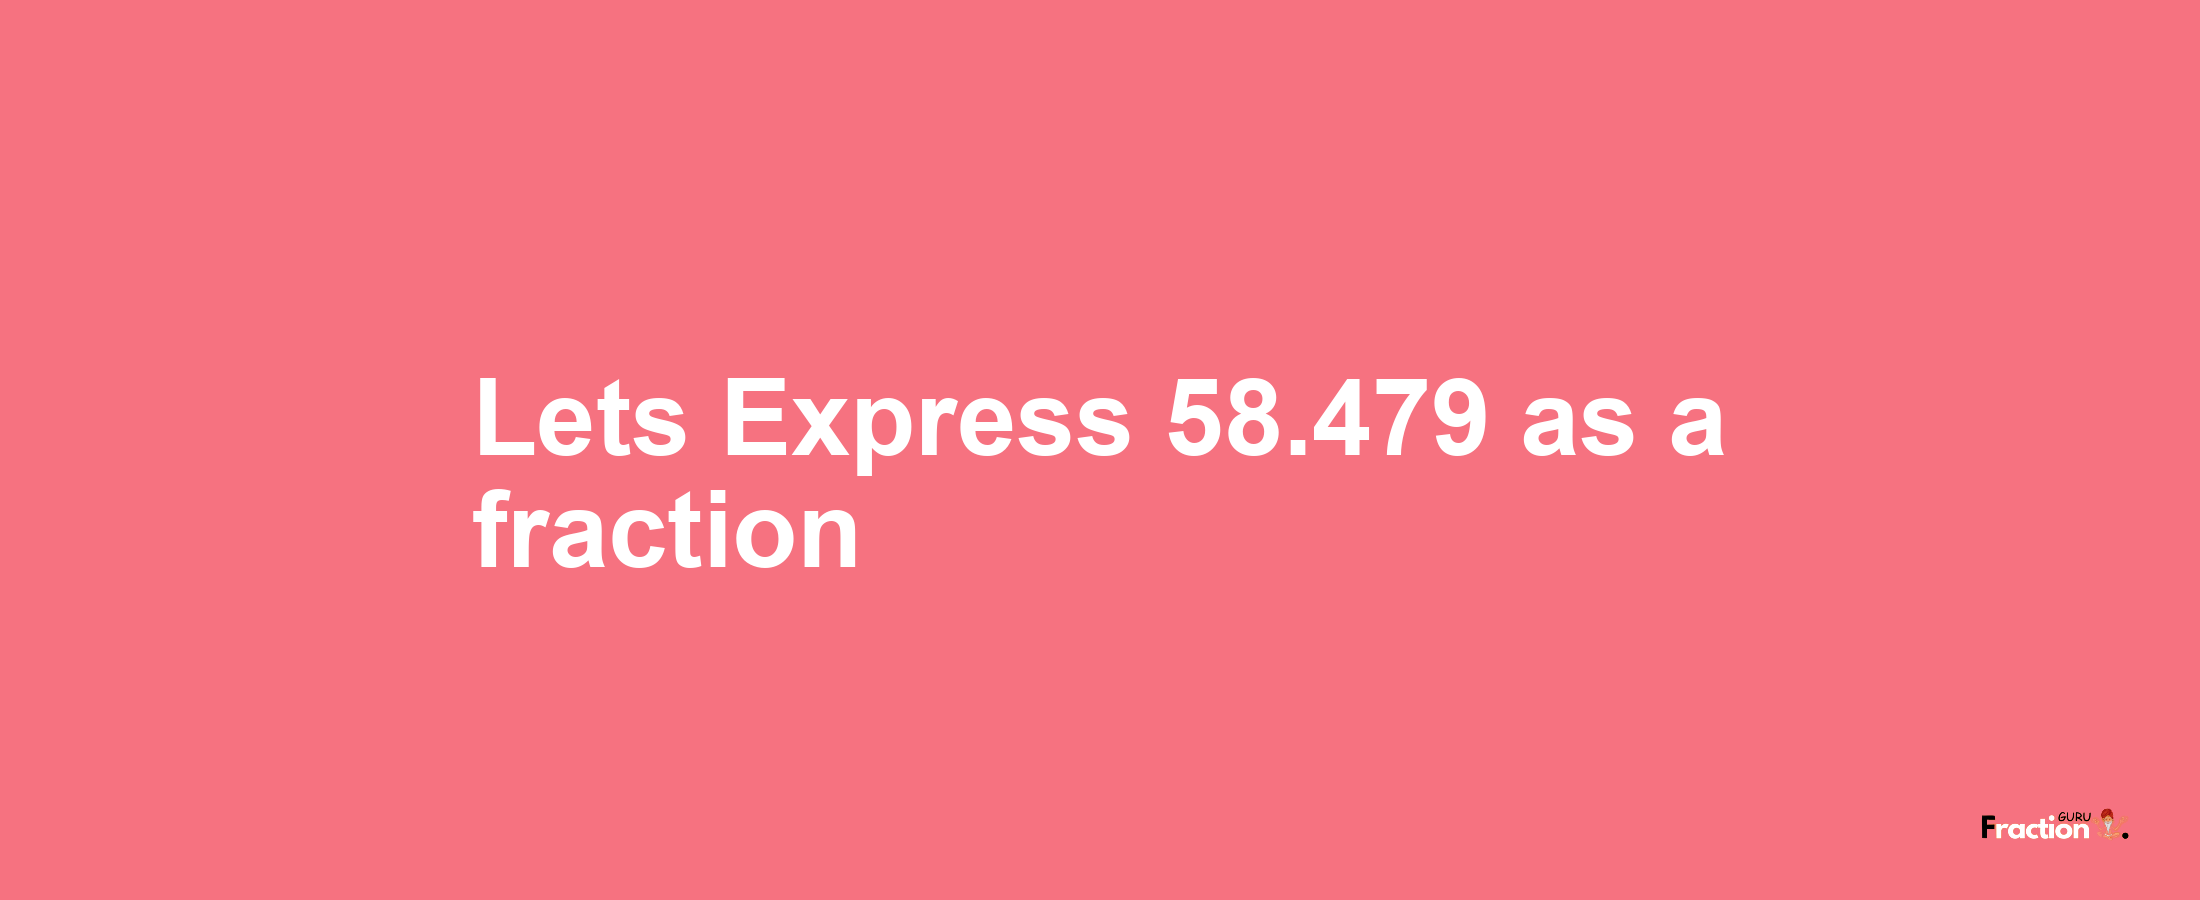 Lets Express 58.479 as afraction